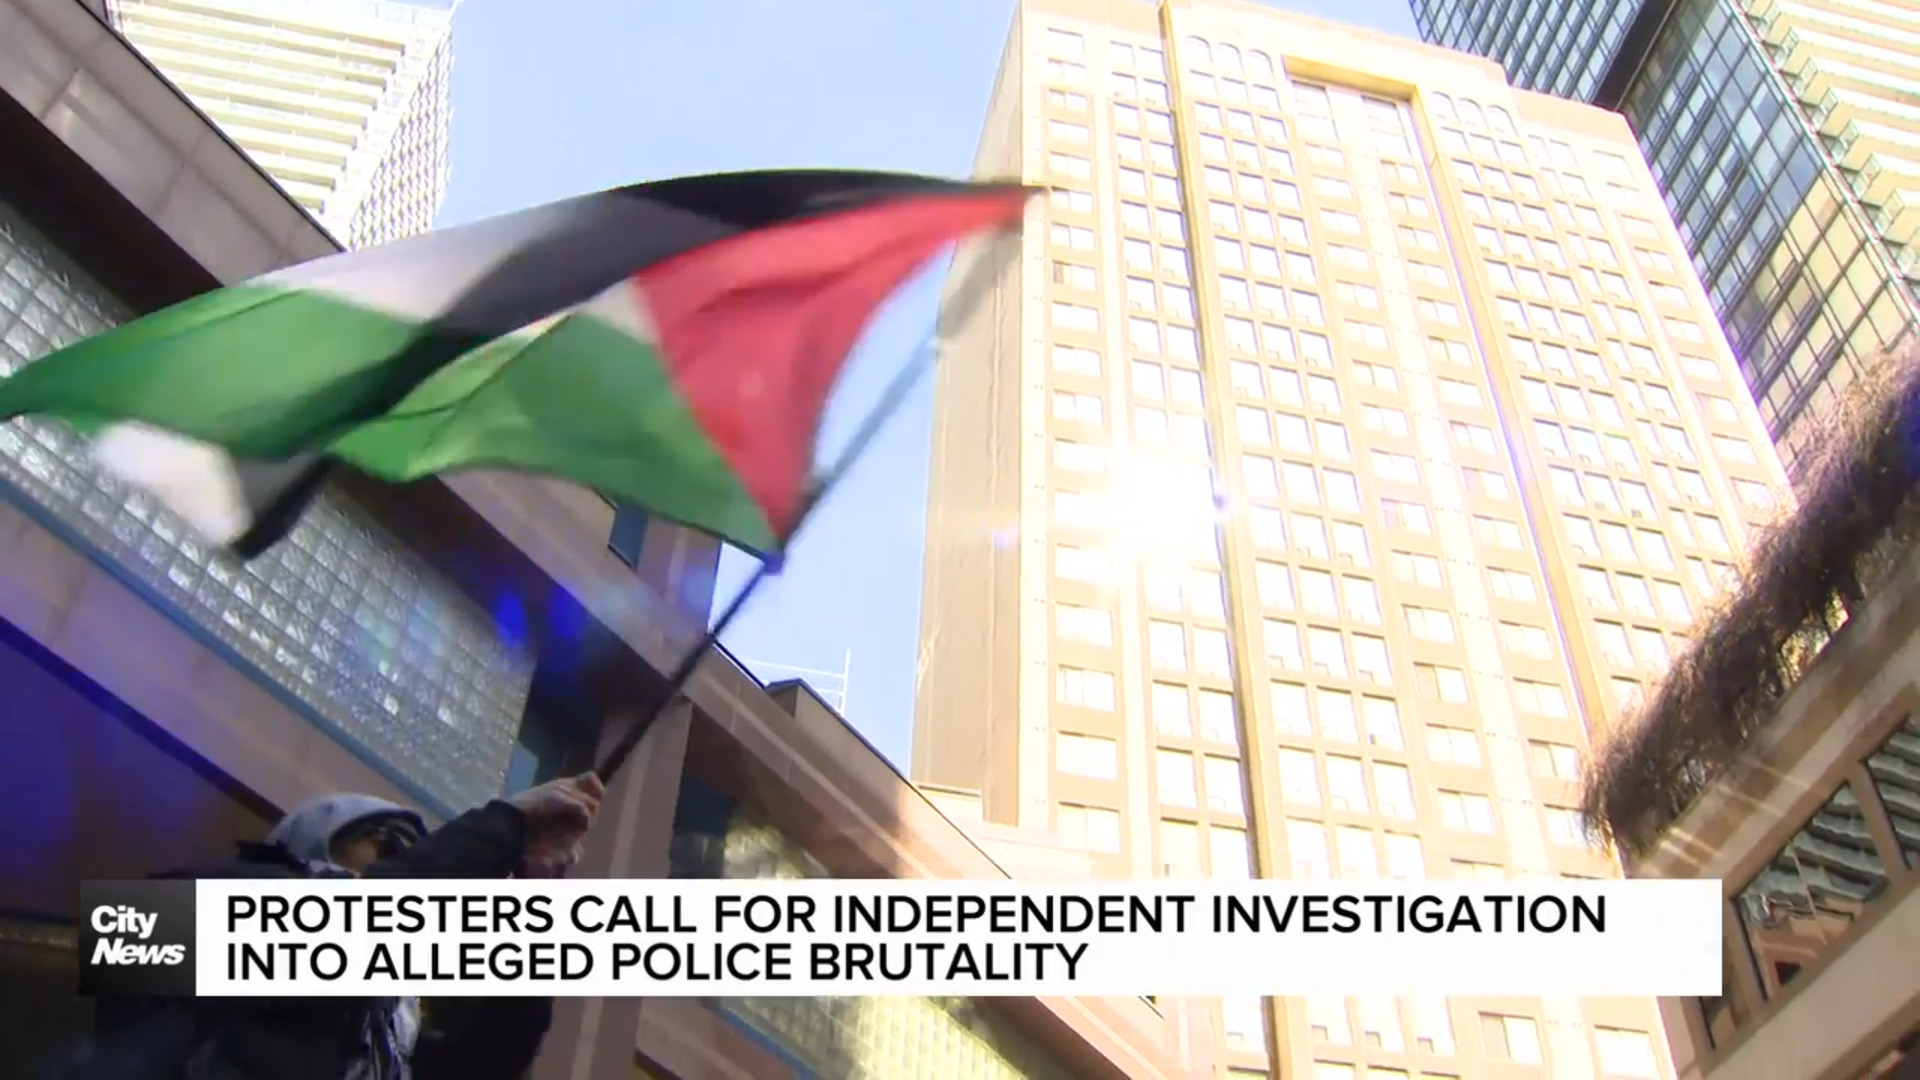 Pro-Palestinian protesters call for investigation into alleged police brutality